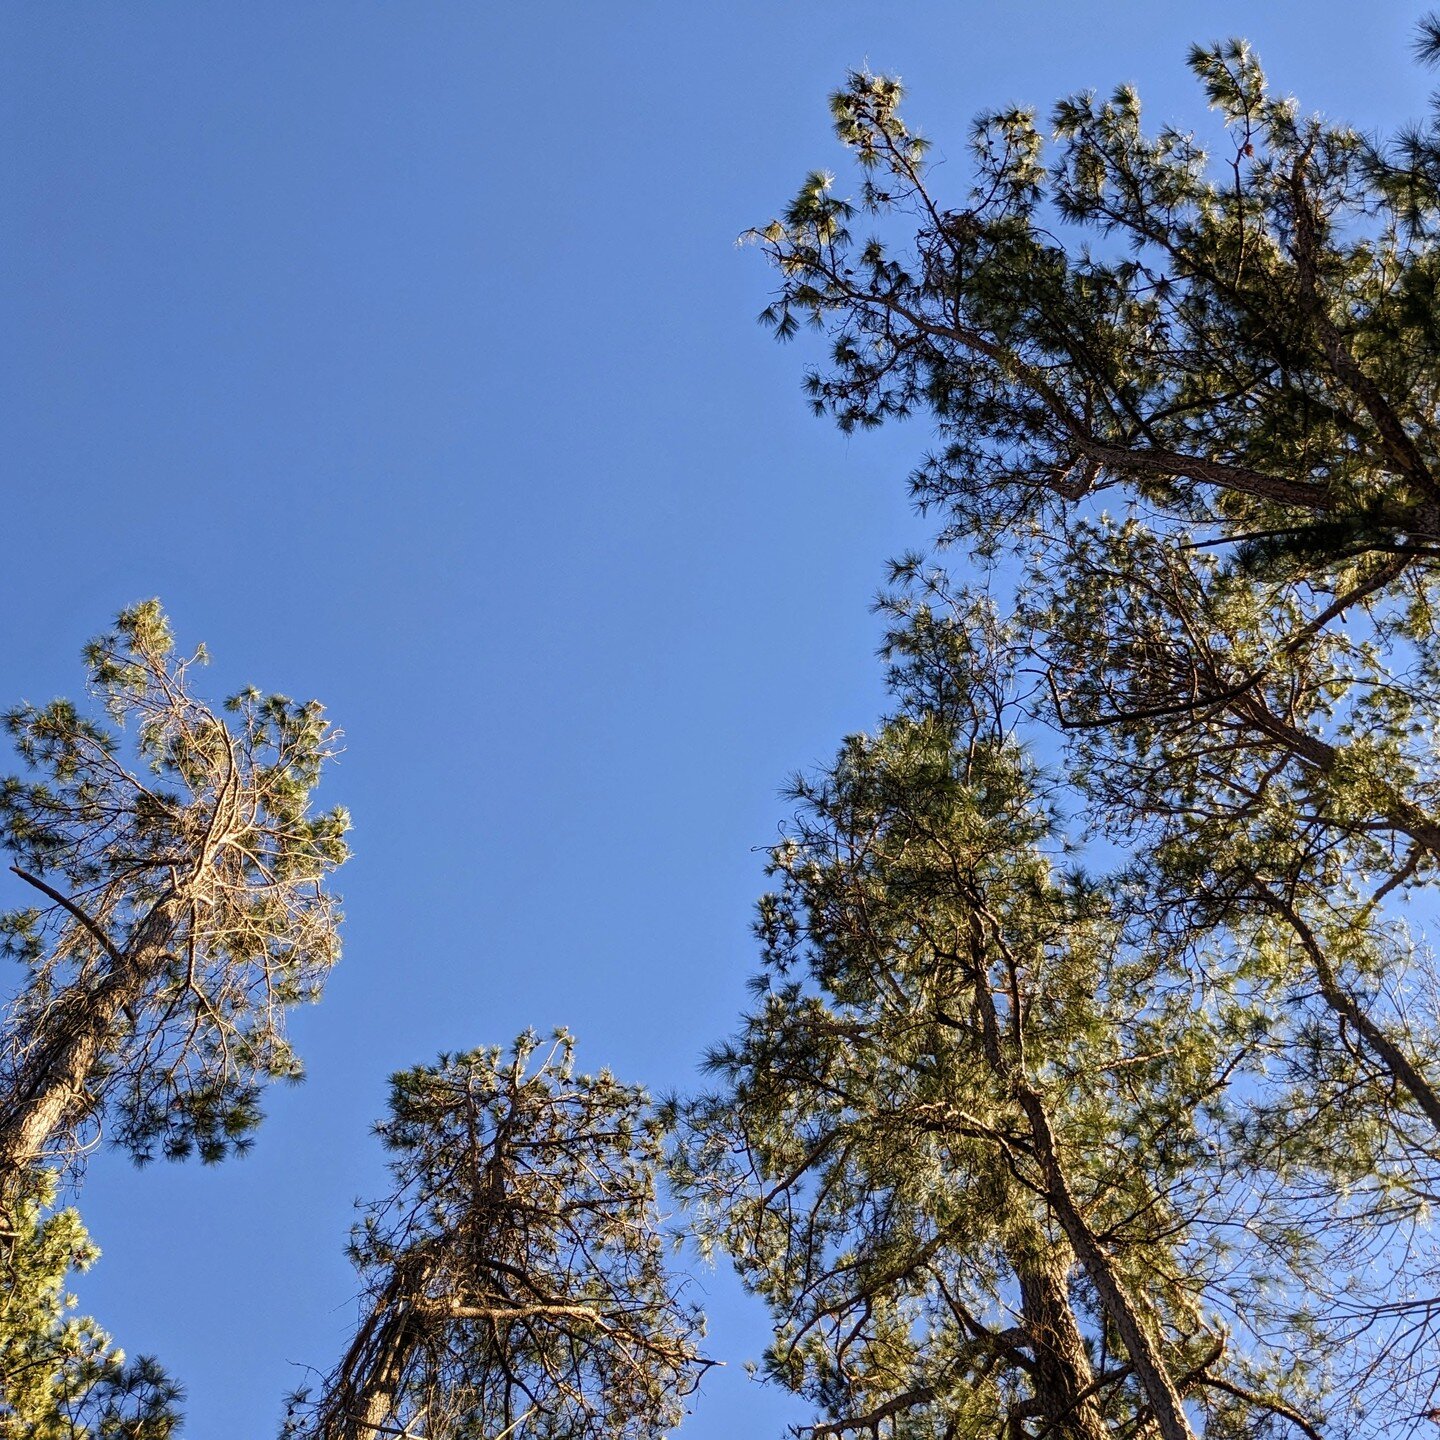 Moment of Wonder.

Staring up at the trees I could name as a child (loblolly pines) as I sit in my father's yard filled to the brim with gratitude for these gentle beings and the Life they have supported. 

Growing up in the southeastern US, loblolly